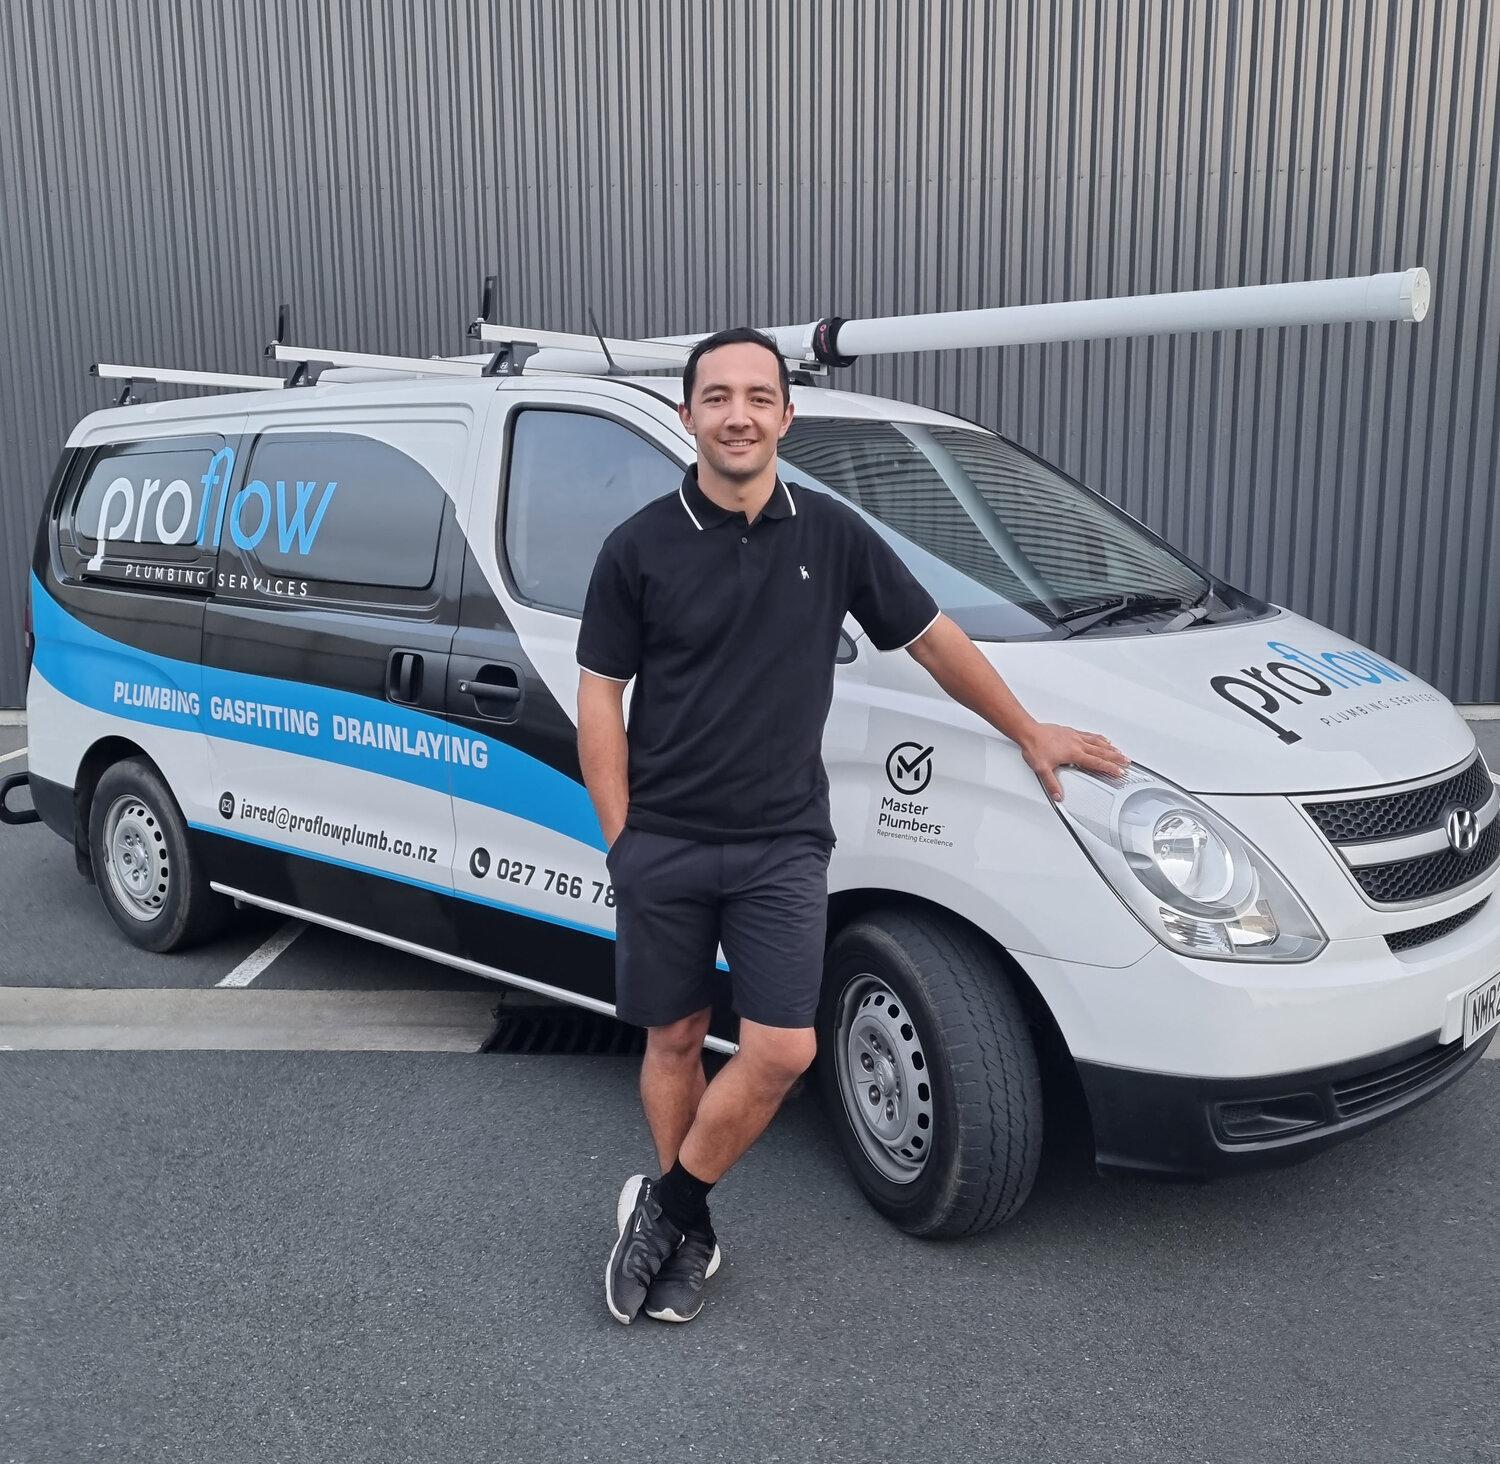 Jared Newing: Leading Proflow Plumbing into Excellence